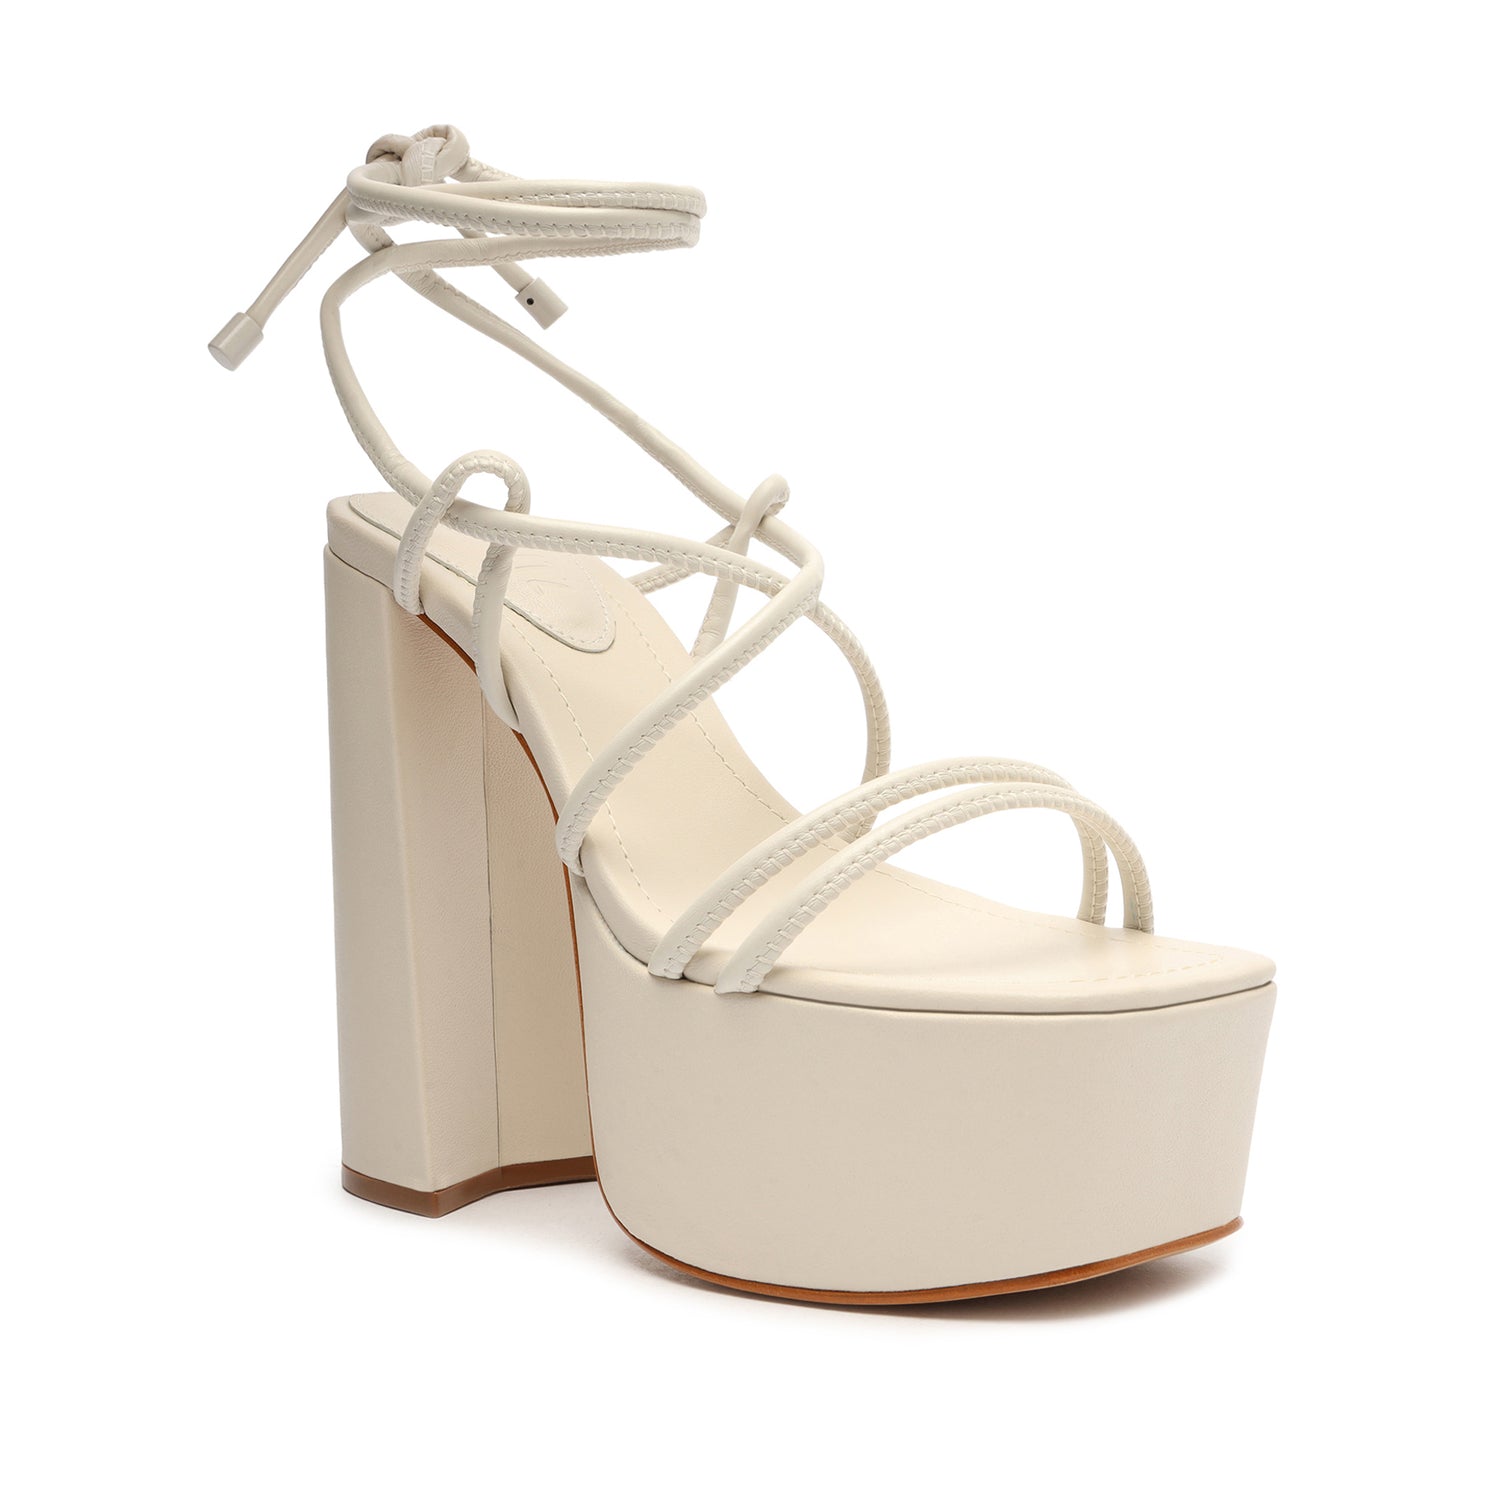 Shaely Sandal Pearl Faux Leather